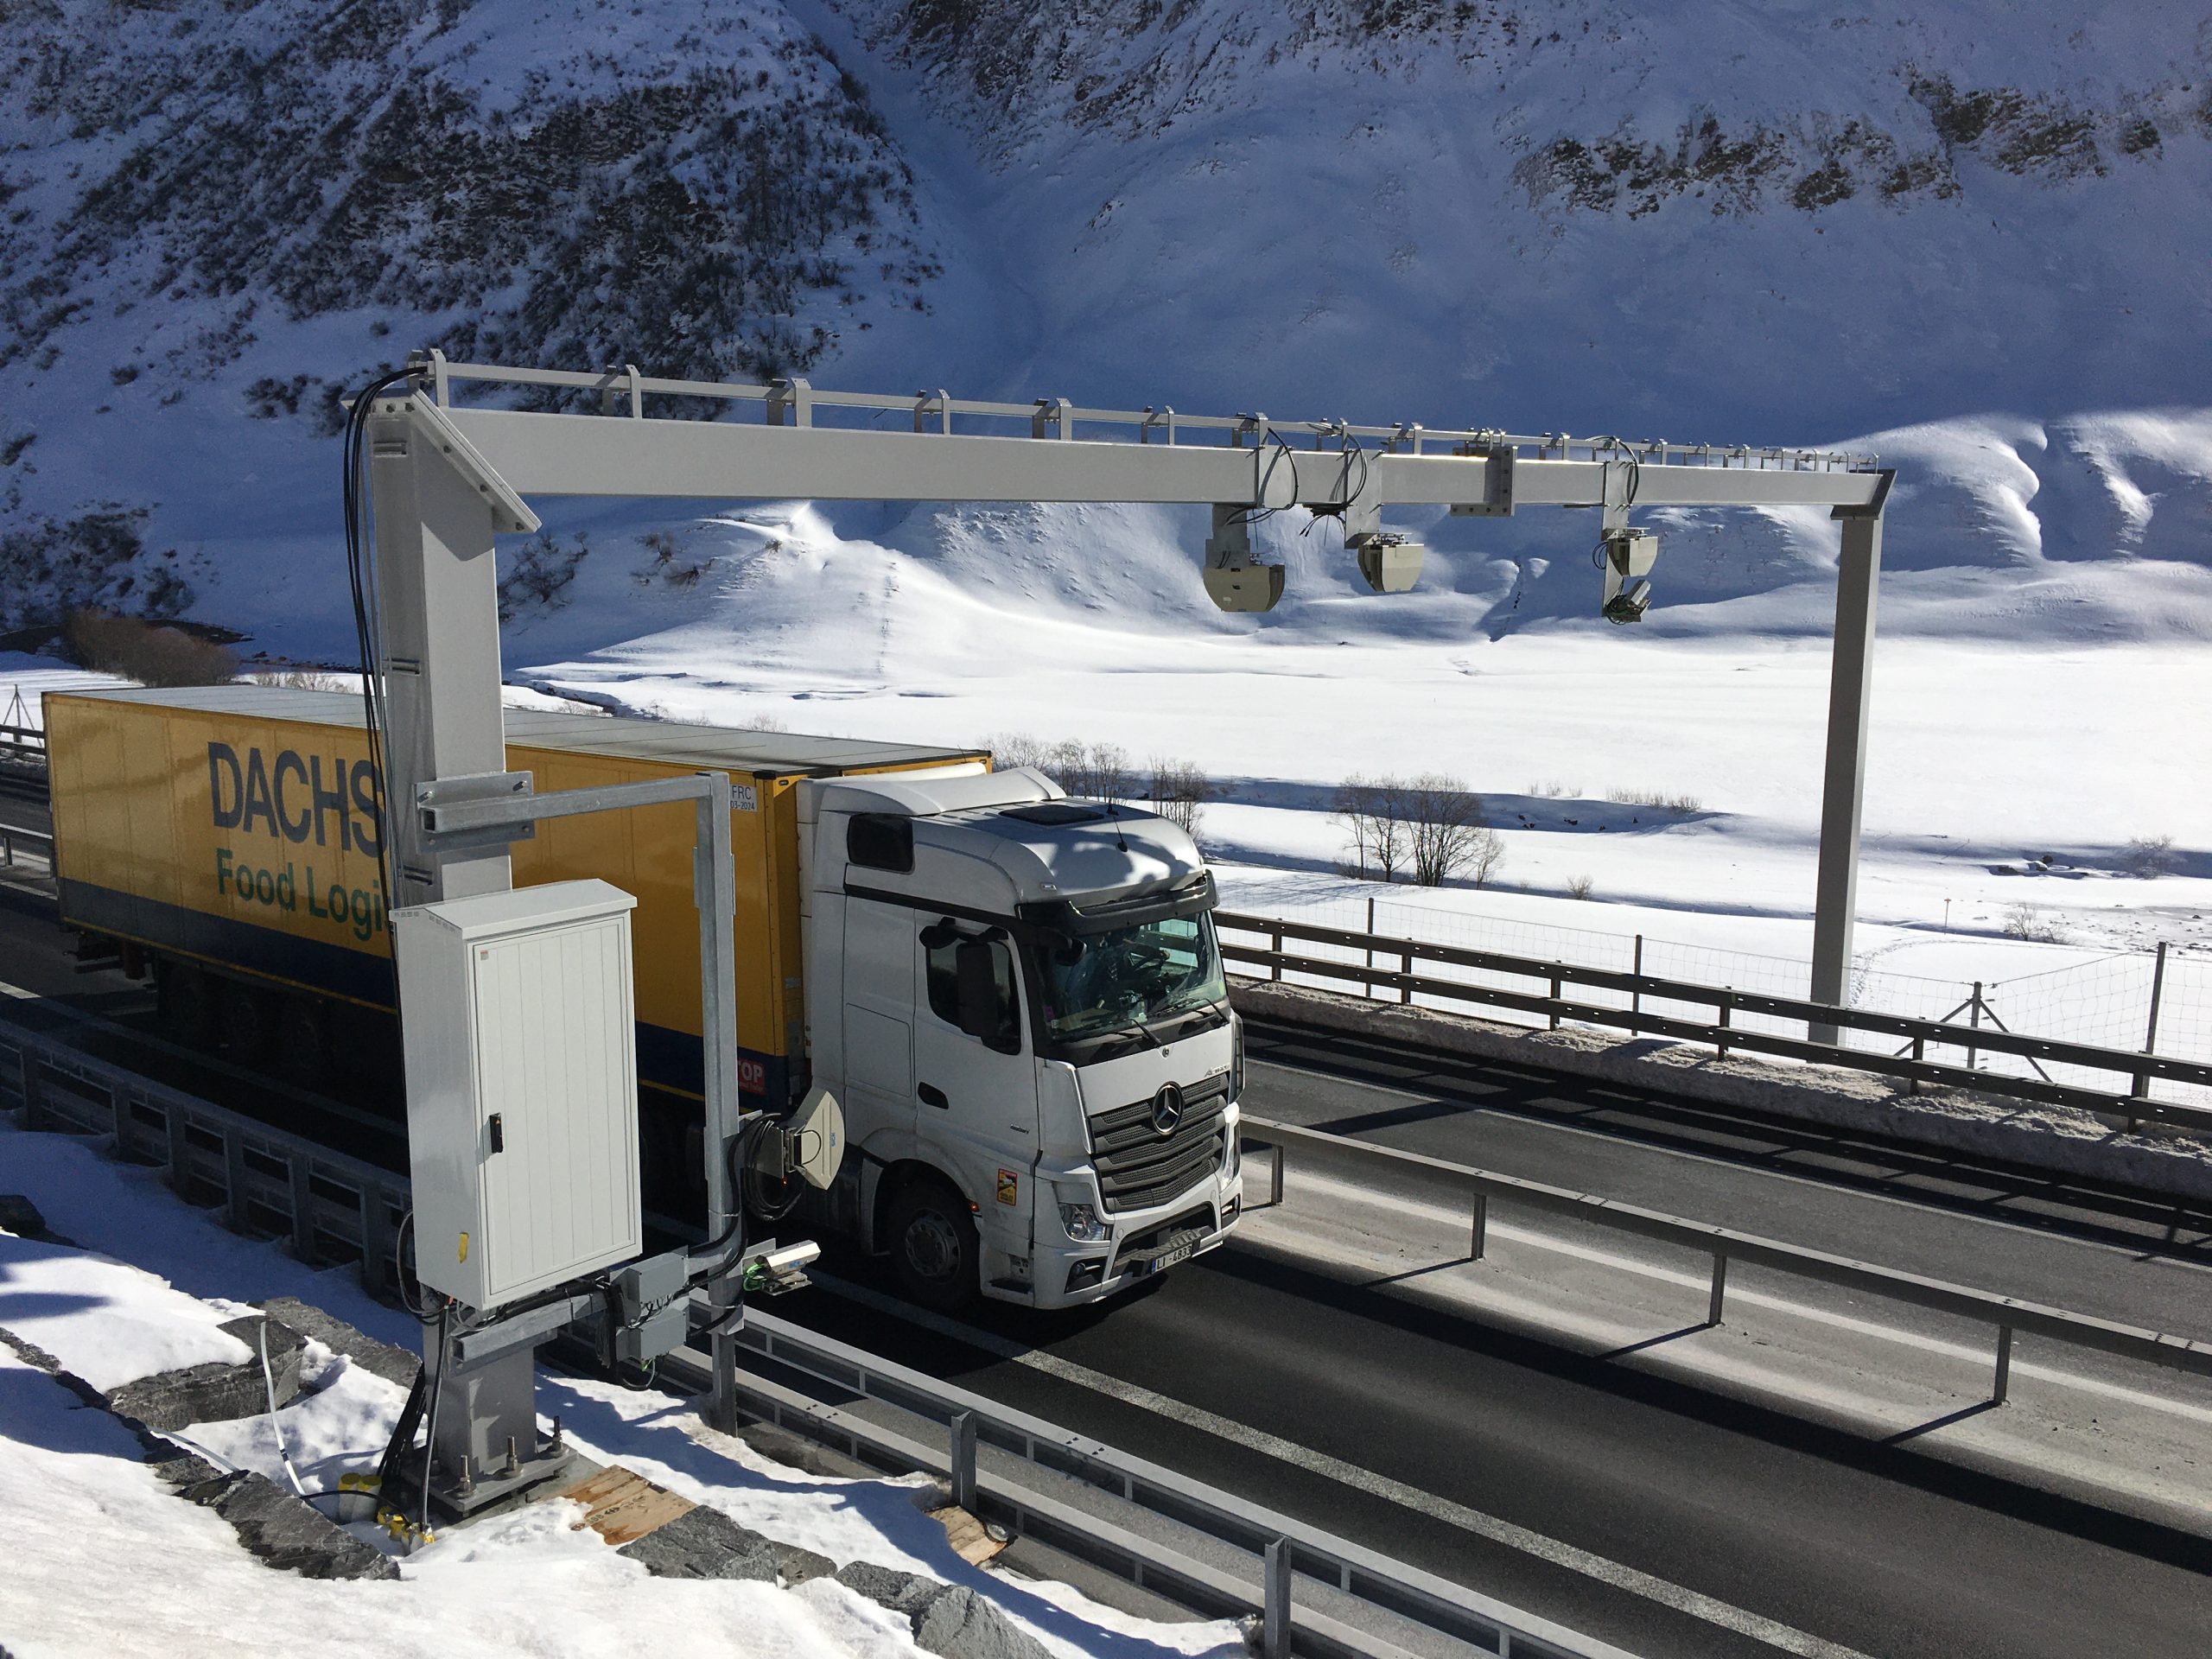 vhd systems, How can AI make road tunnels safer?